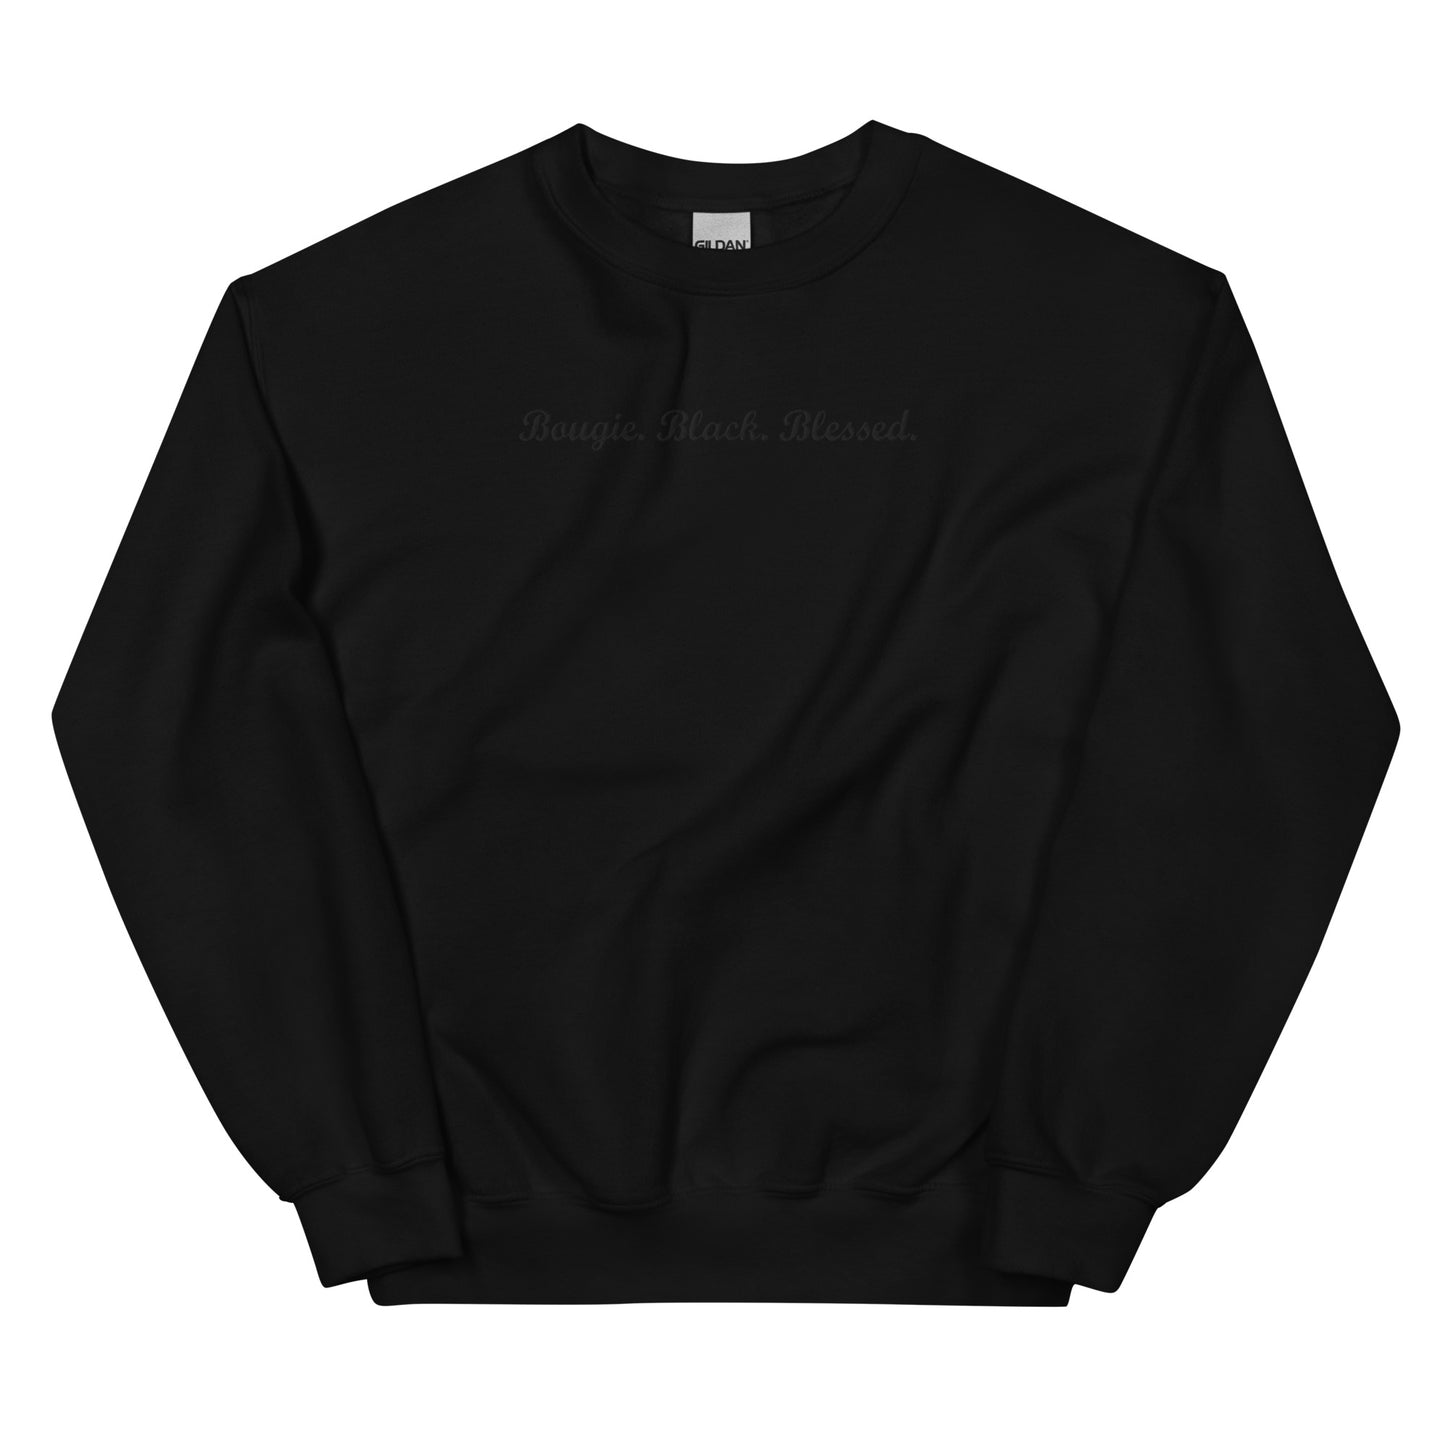 Bougie. Black. Blessed. Sweatshirt with Black Embroidery